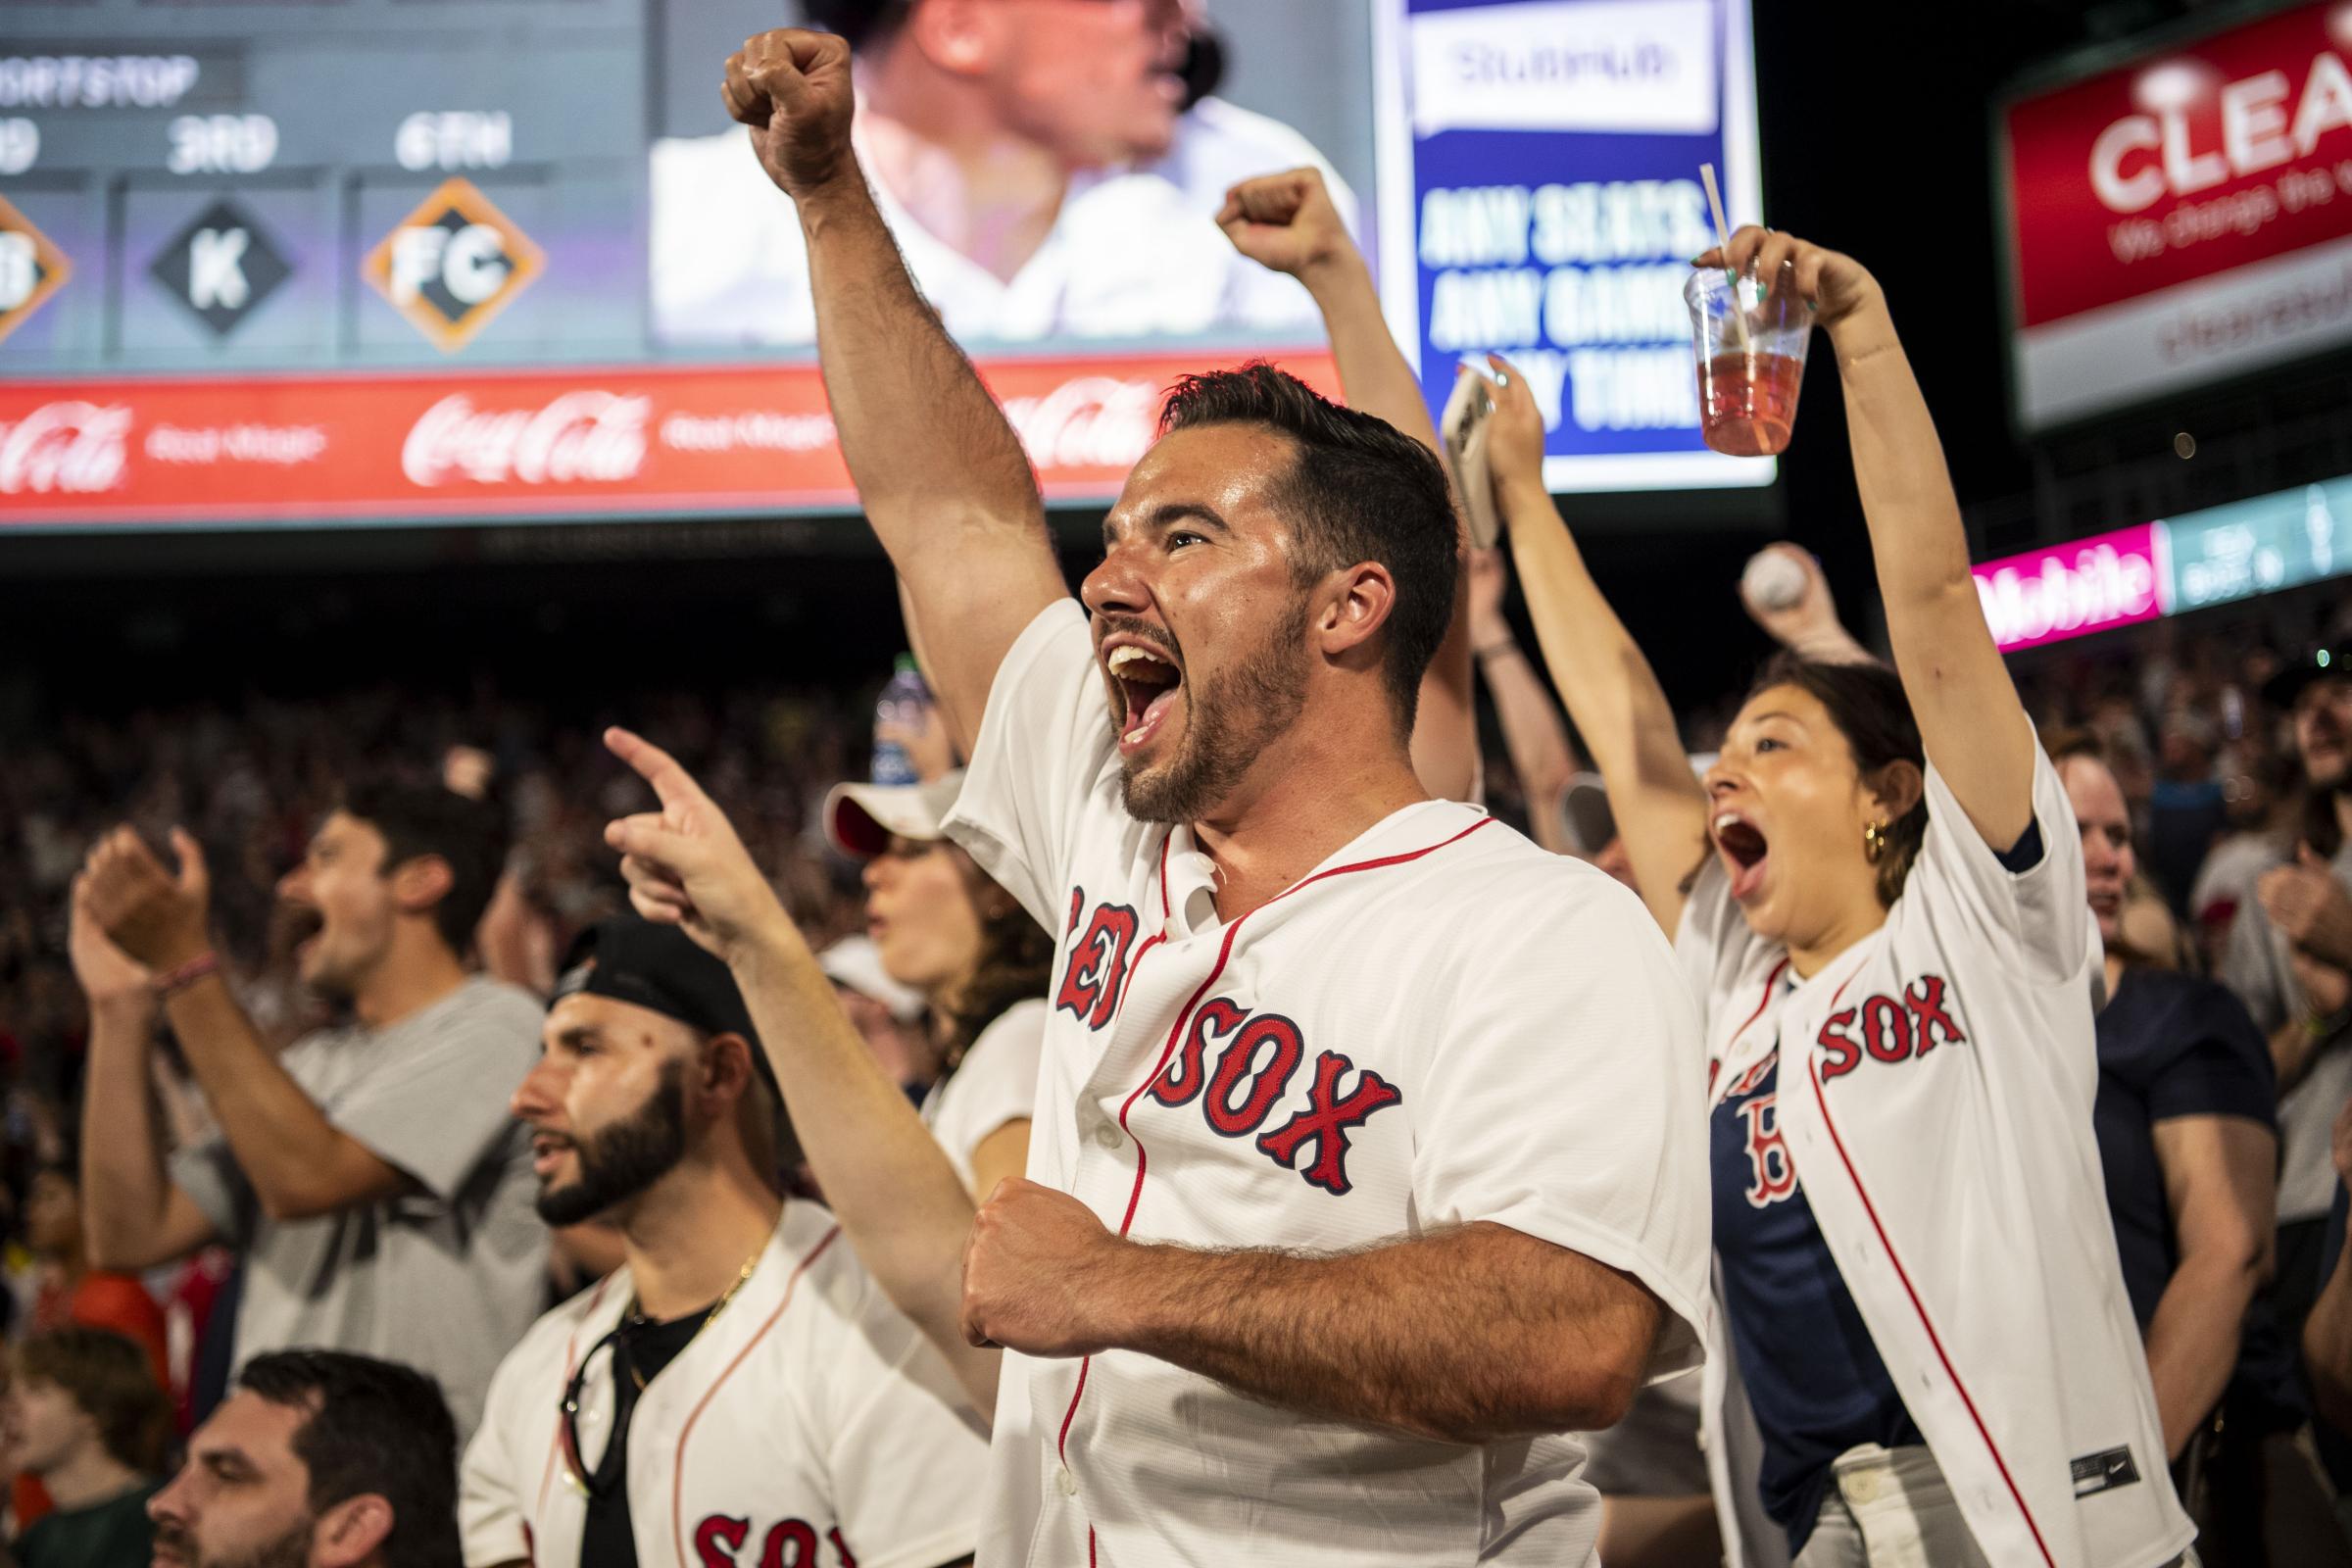 The 2023 Boston Red Sox  - July 6, 2023, Boston, MA: Fans react during a game...